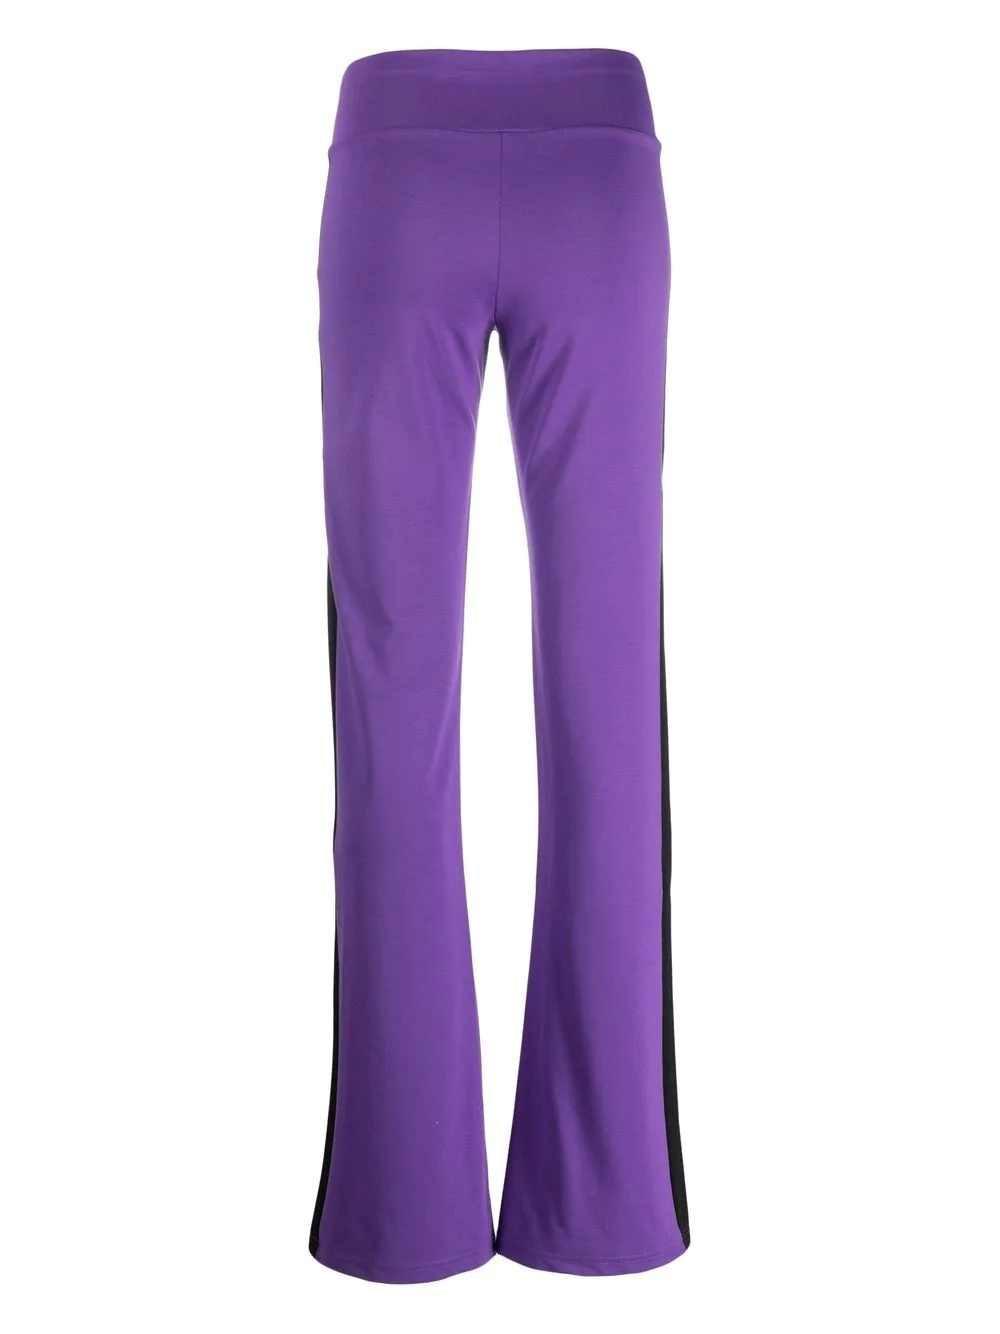 stretch-jersey trousers - 2